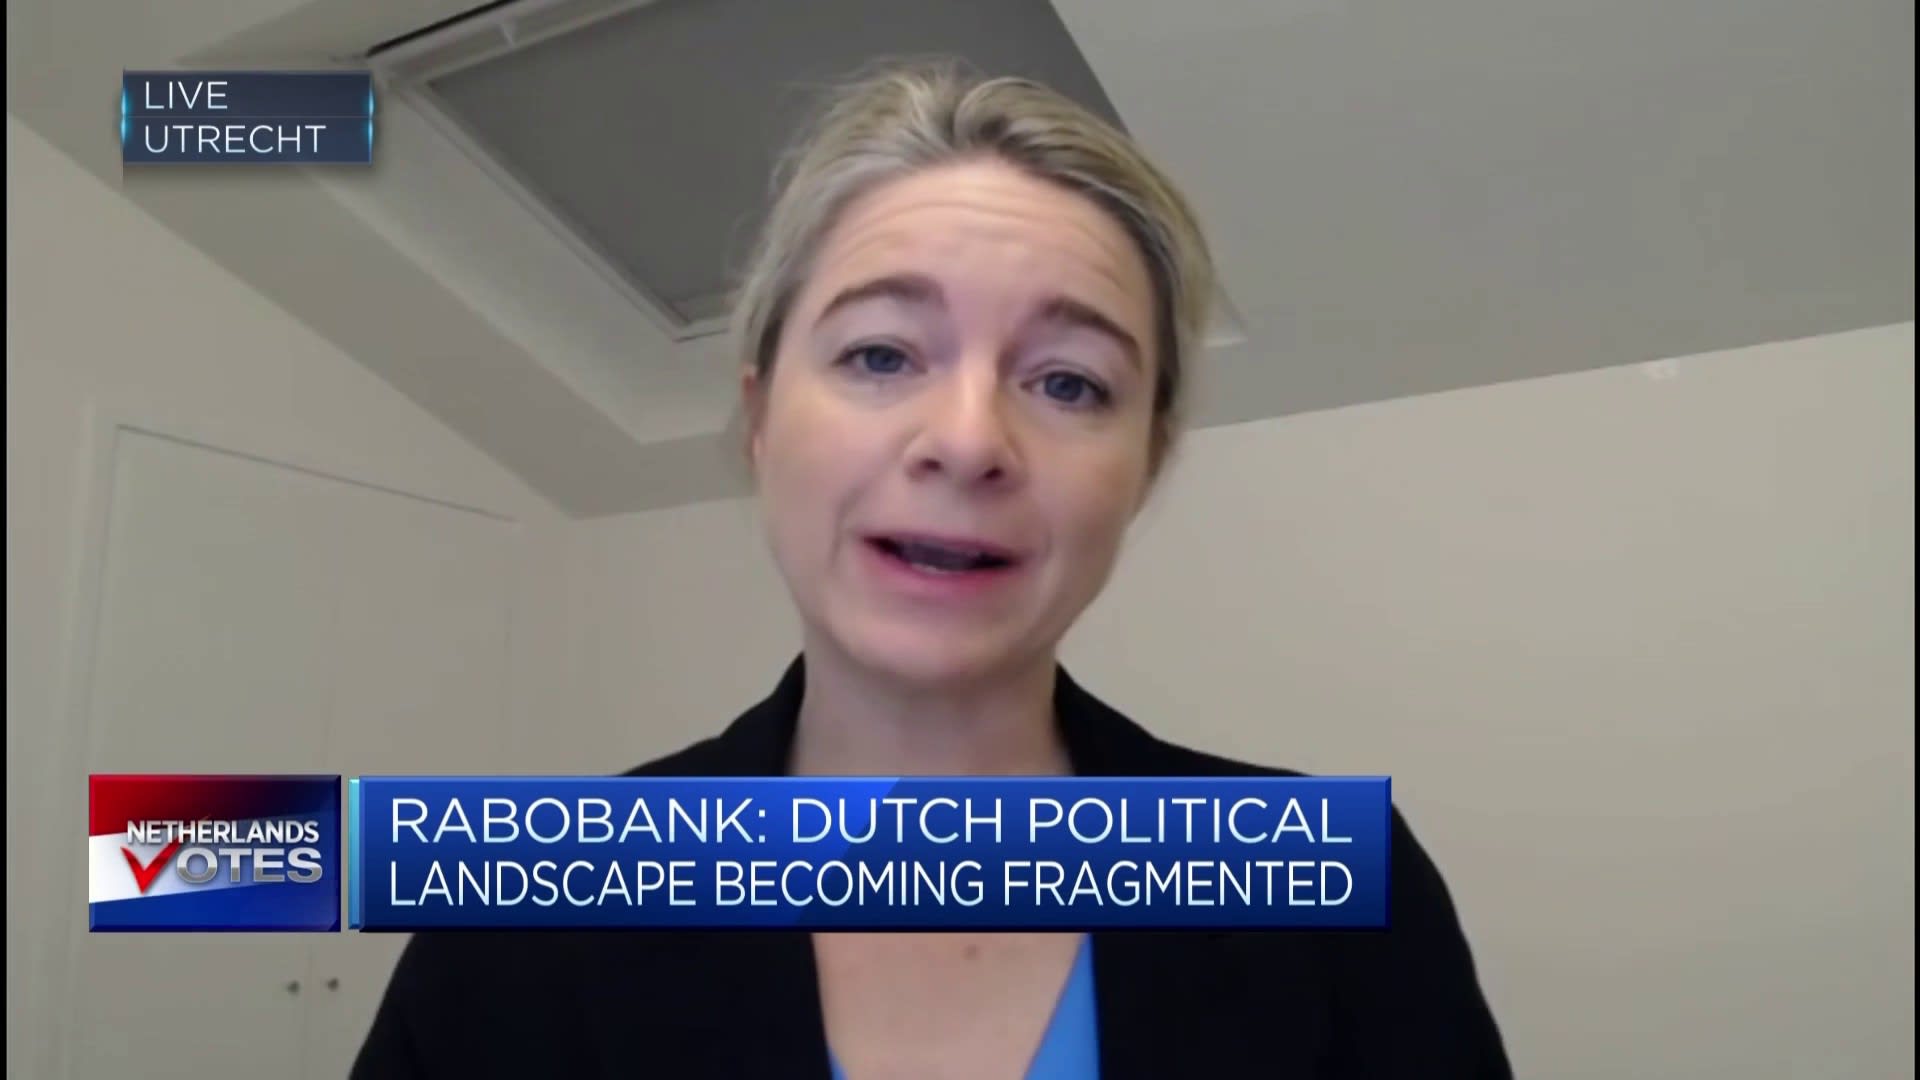 Dutch Freedom Party has 'much less clear' ideas on how to pay for populist policies: Economist